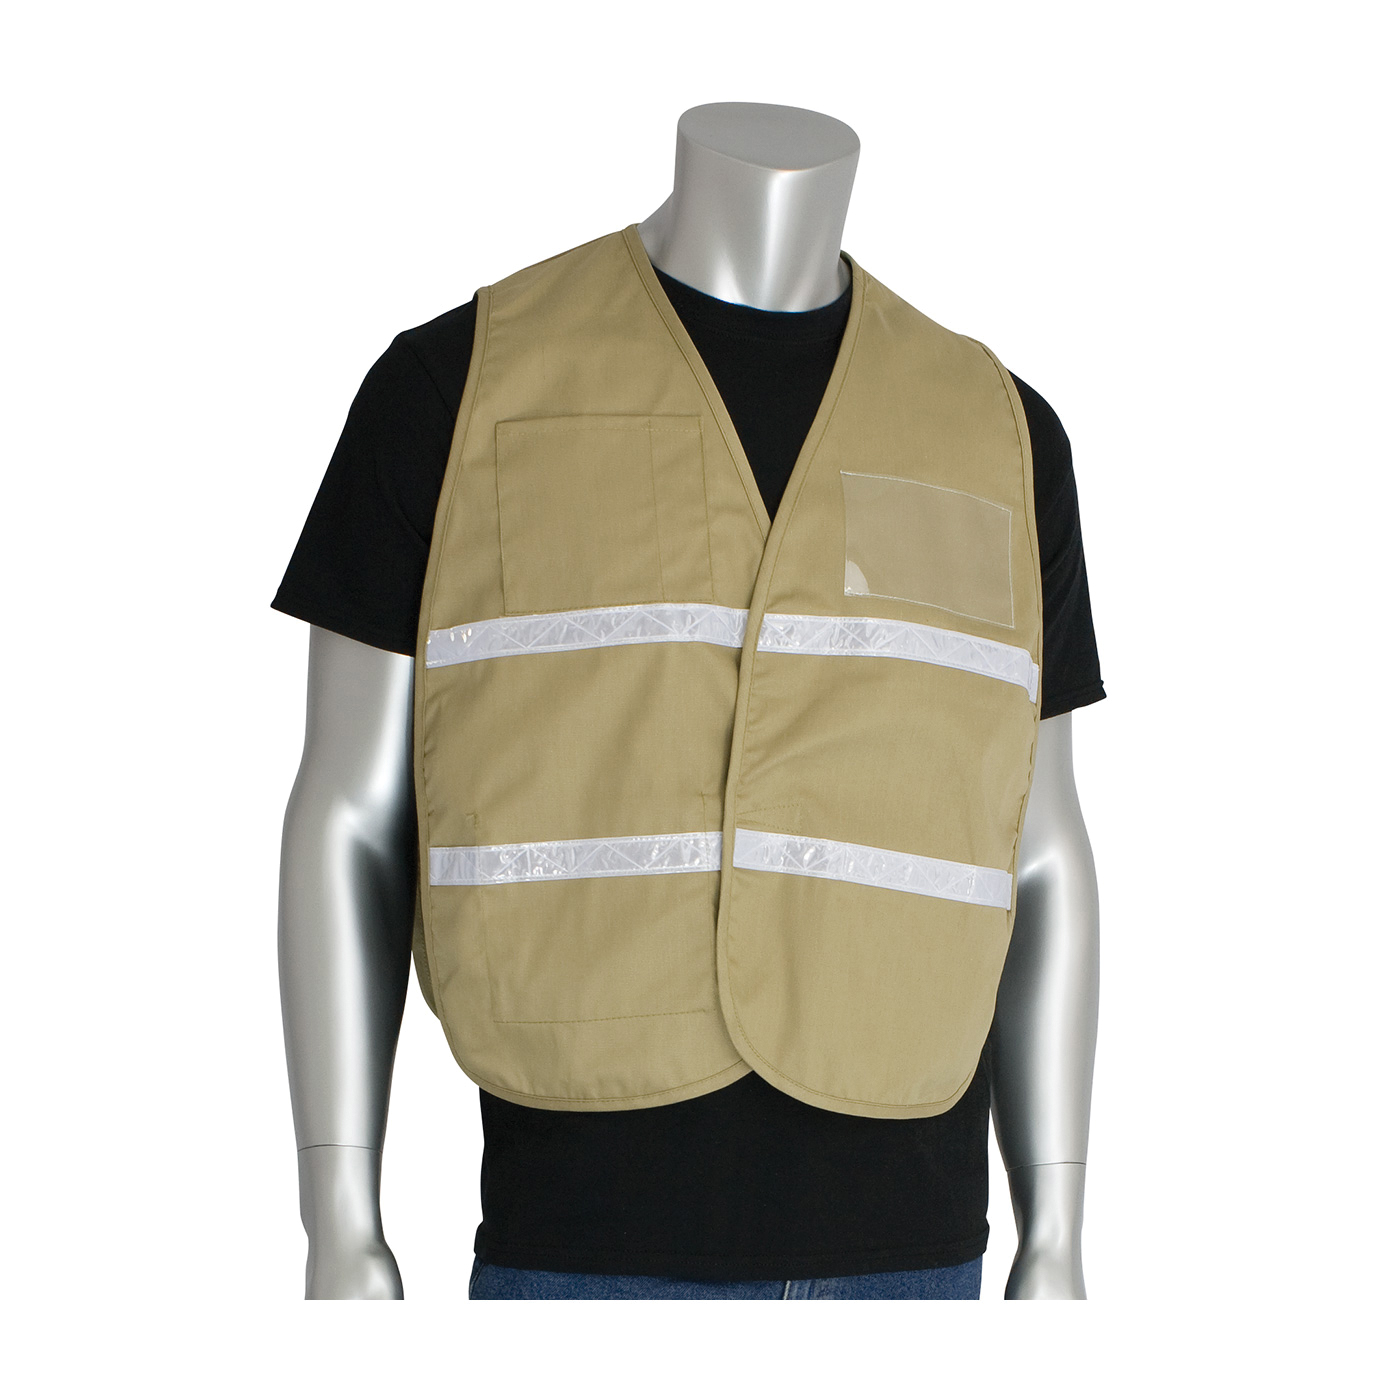 PIP® 300-2506 Non-ANSI Incident Command Vest, Tan, 35% Cotton/65% Polyester, Hook and Loop Closure, 4 Pockets